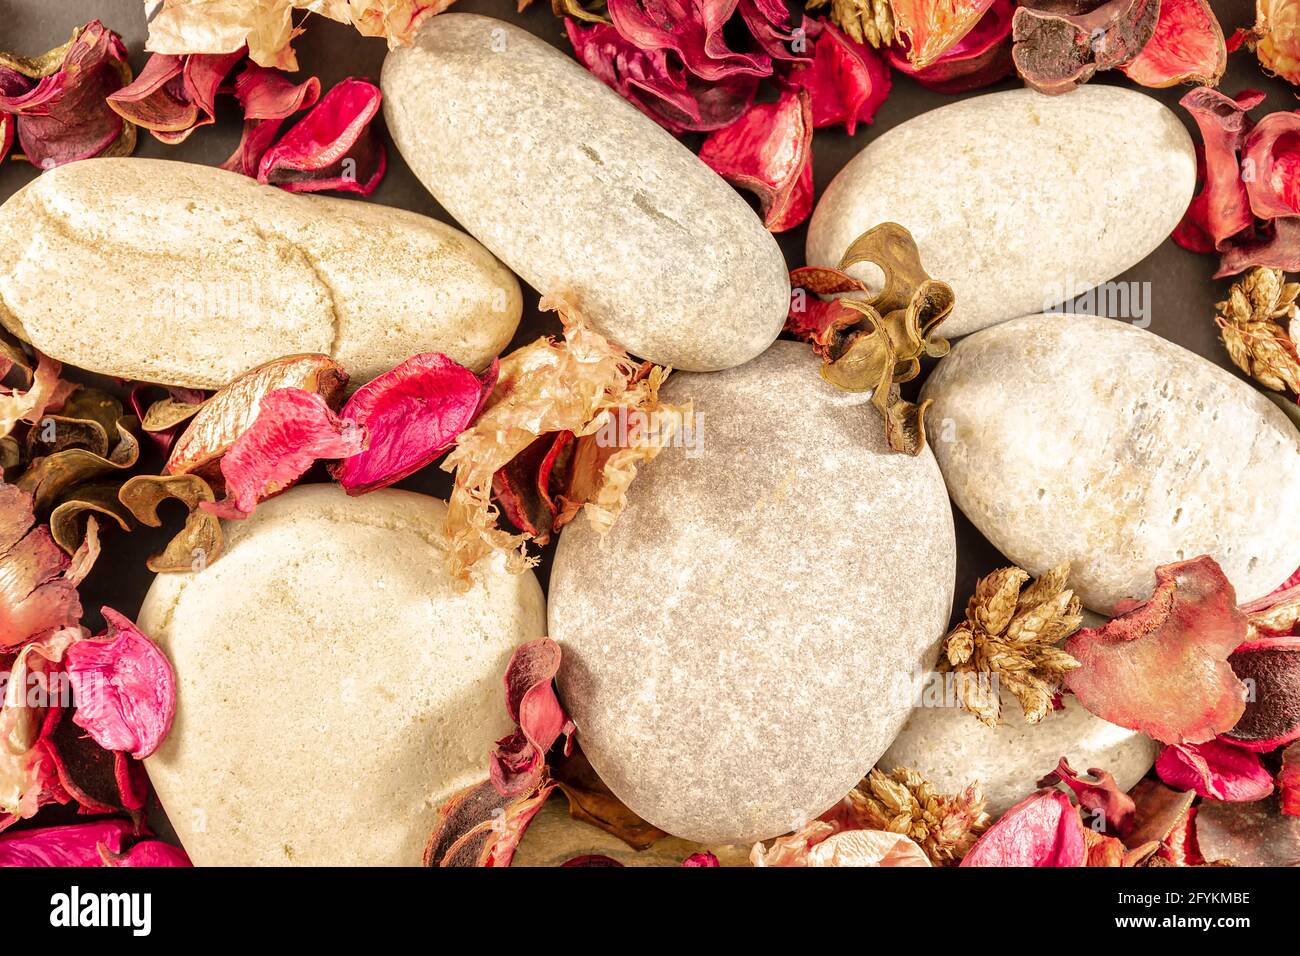 Wallpaper of beach stones and dried flowers.Photograph with zenithal point of view and shot in horizontal format. Stock Photo